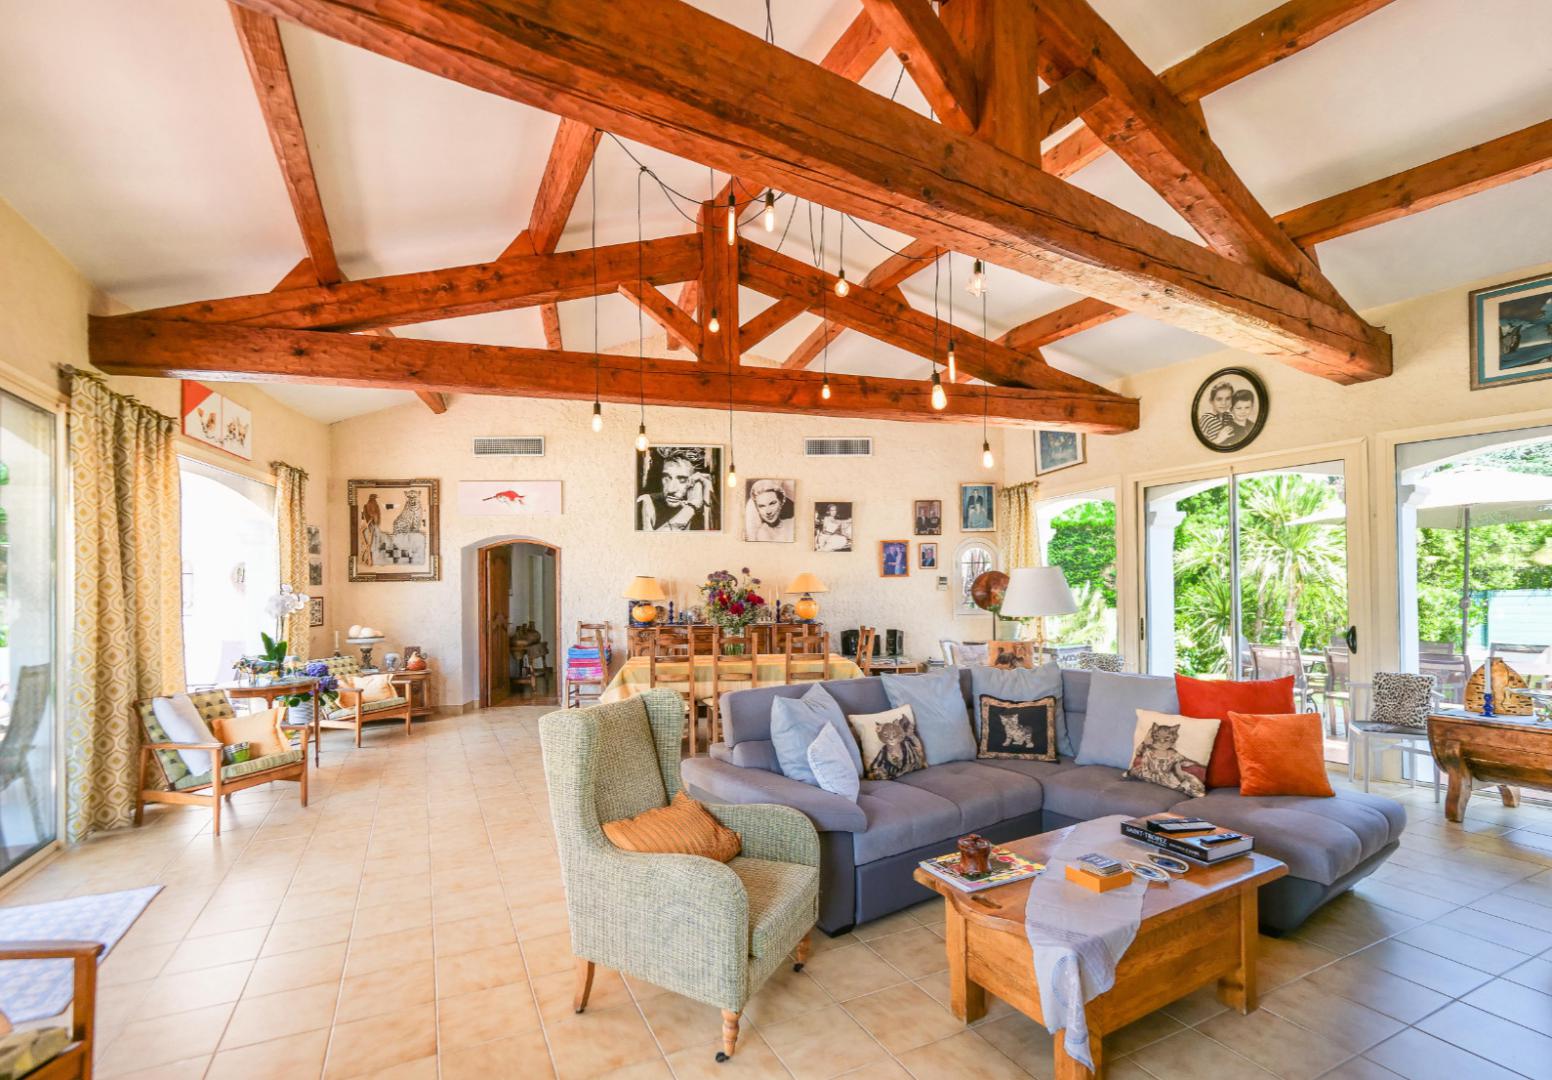 VACATION RENTALS AND BED AND BREAKFASTS SAINT-TROPEZ